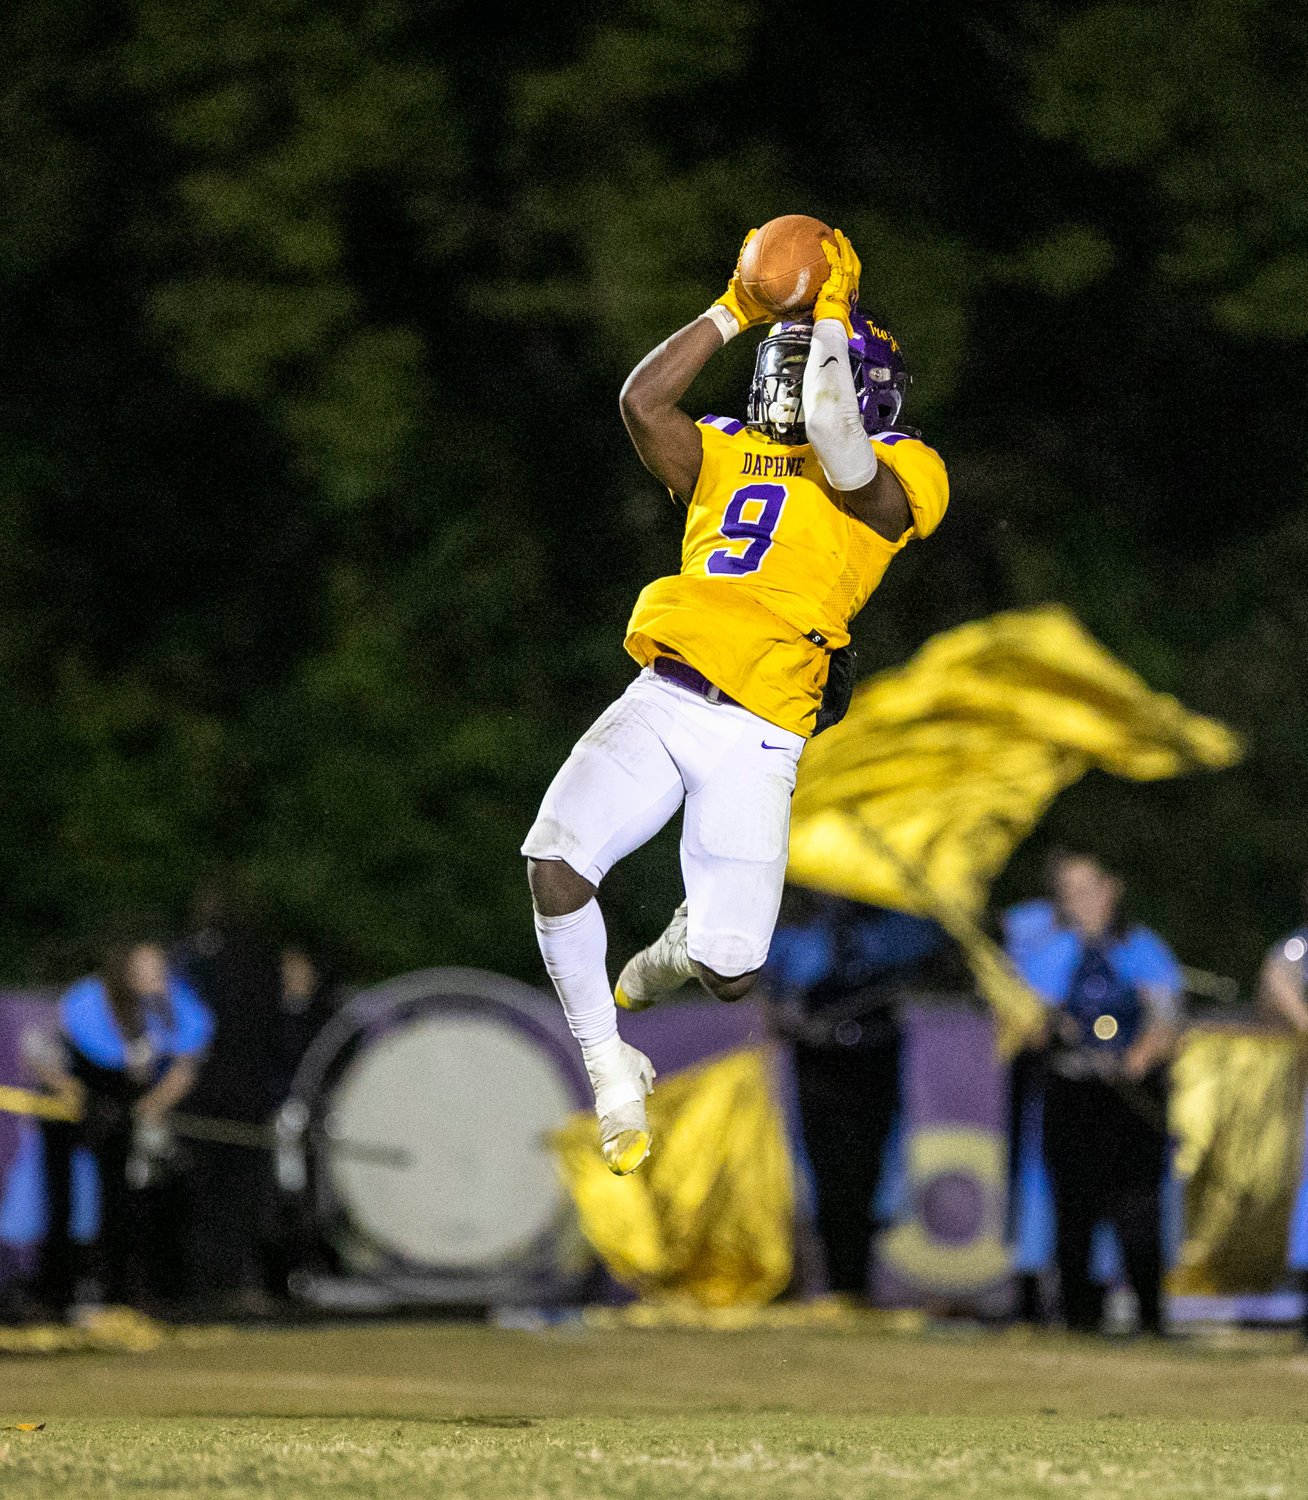 Daphne’s Cam Long leaps in an attempt to down a punt during the Trojans’ Class 7A Region 1 tilt against the Fairhope Pirates at Jubilee Stadium Oct. 7. In Daphne’s region game against Davidson, Long ran for a touchdown, blocked a field goal and returned an interception for a touchdown.